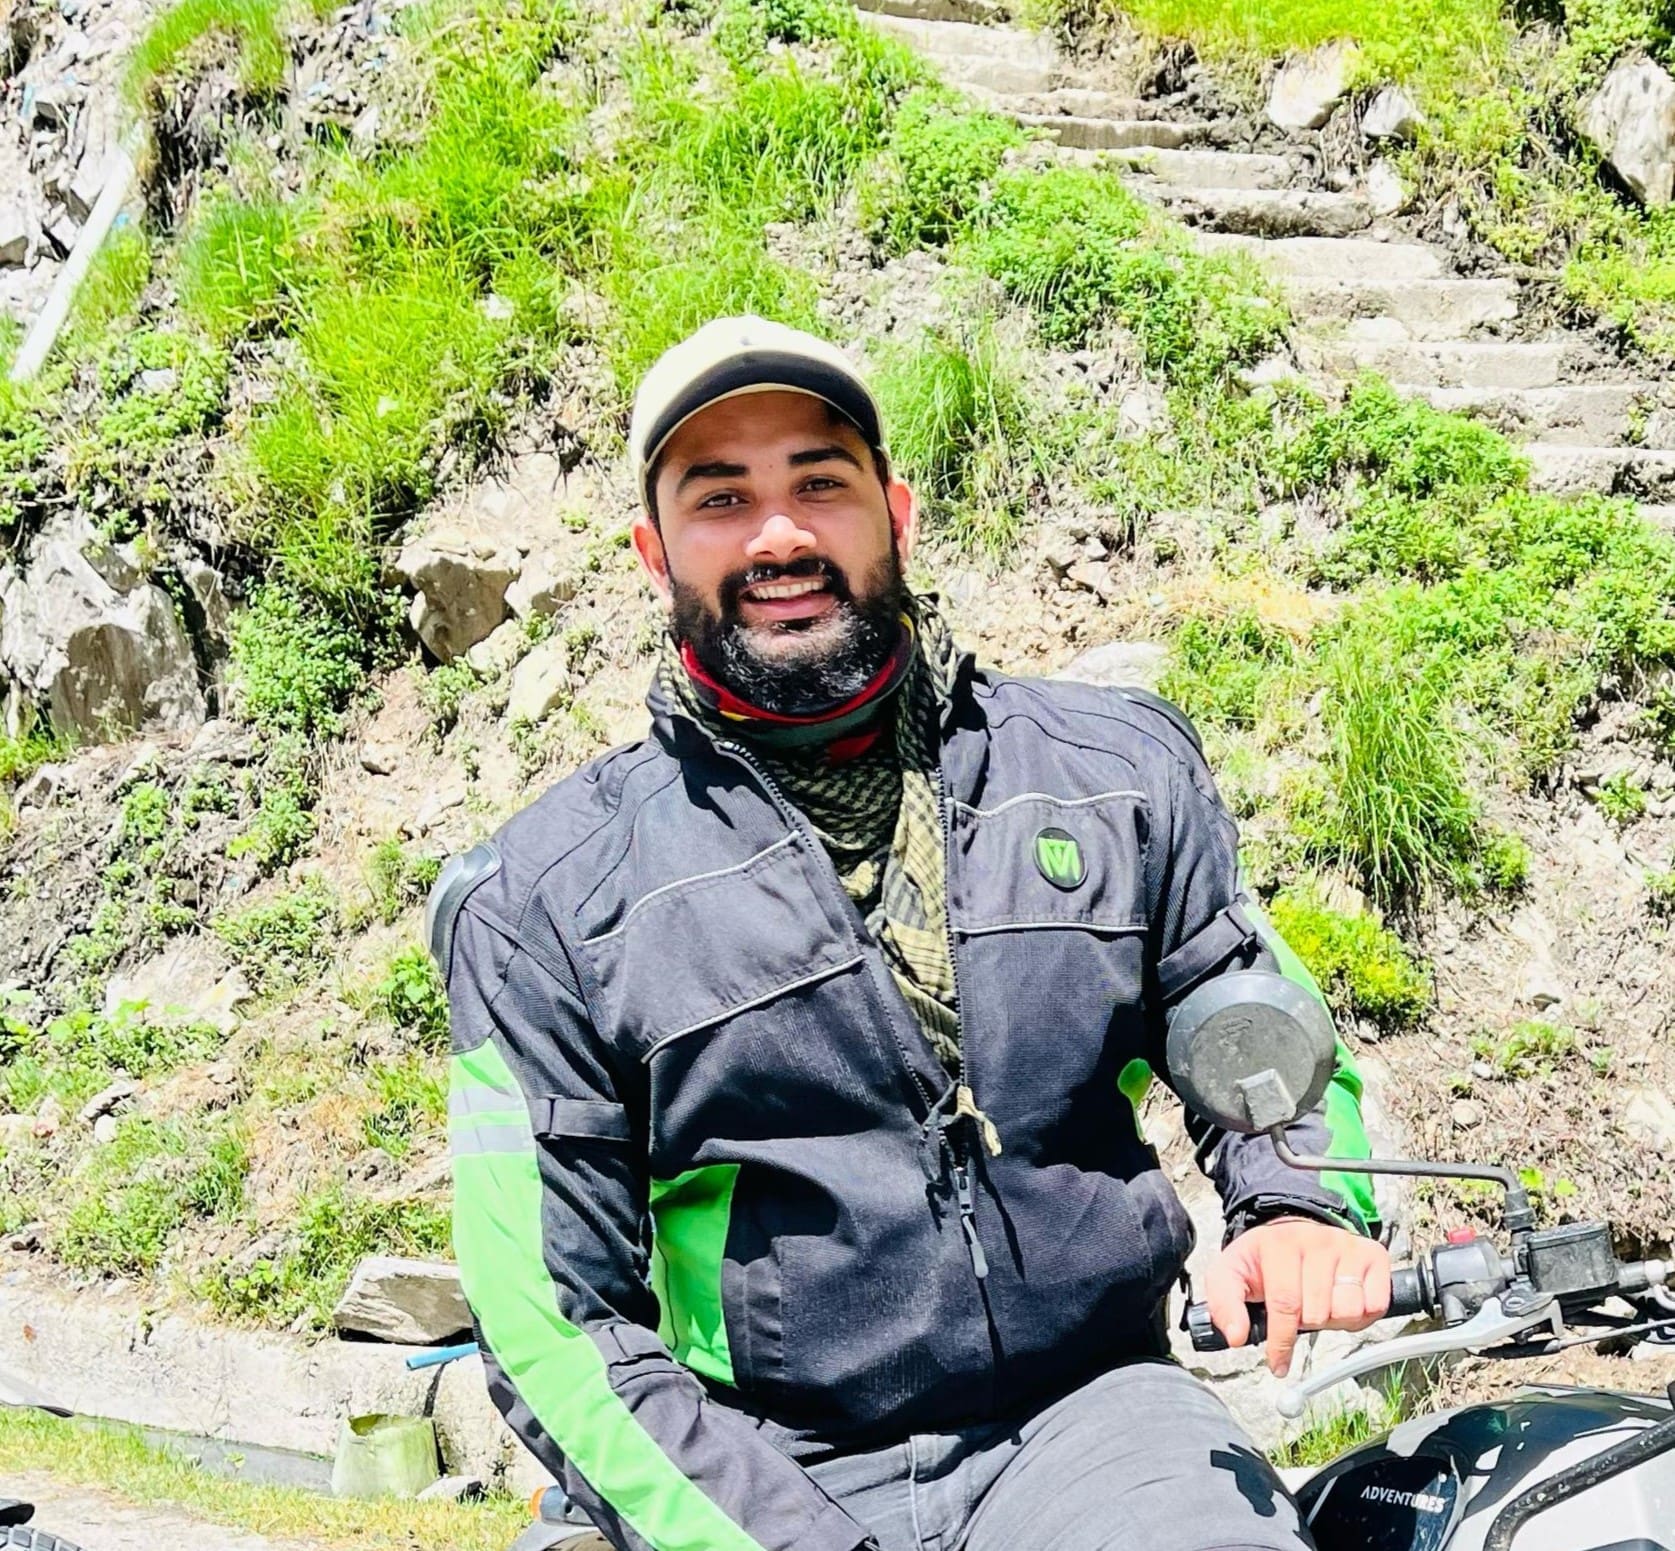 Motorbike tour guide smiling on a mountain trail with lush greenery in the background, illustrating a sense of adventure and expertise in outdoor excursions.